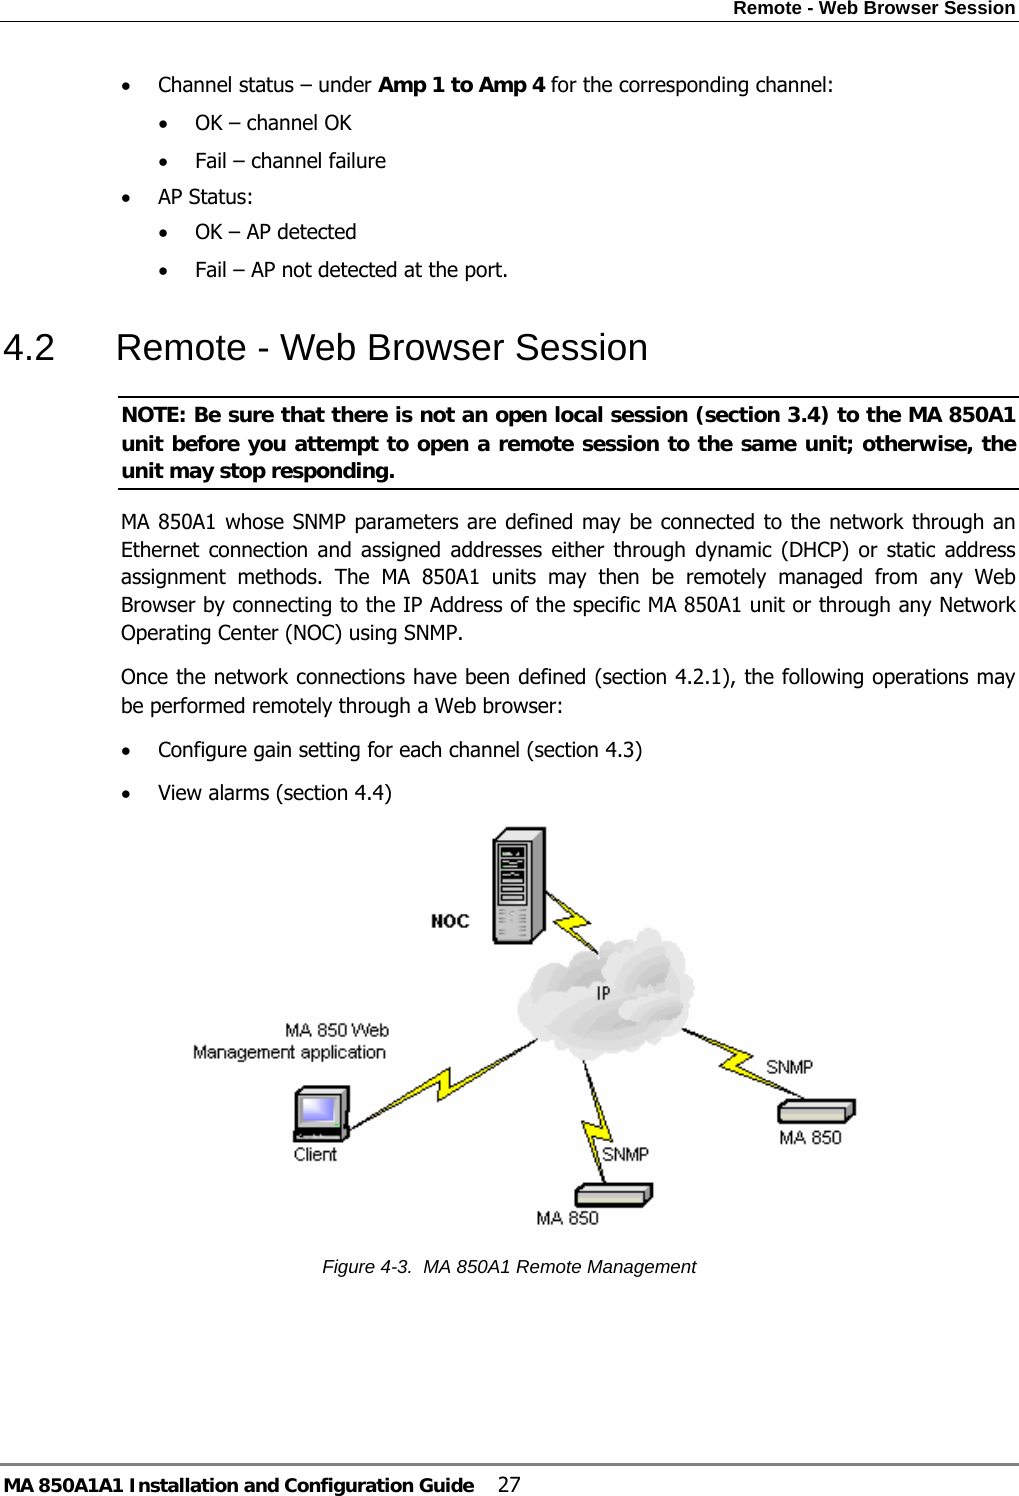 Remote - Web Browser Session MA 850A1A1 Installation and Configuration Guide  27 • Channel status – under Amp 1 to Amp 4 for the corresponding channel: • OK – channel OK • Fail – channel failure • AP Status: • OK – AP detected • Fail – AP not detected at the port. 4.2  Remote - Web Browser Session NOTE: Be sure that there is not an open local session (section  3.4) to the MA 850A1 unit before you attempt to open a remote session to the same unit; otherwise, the unit may stop responding. MA 850A1 whose SNMP parameters are defined may be connected to the network through an Ethernet connection and assigned addresses either through dynamic (DHCP) or static address assignment methods. The MA 850A1 units may then be remotely managed from any Web Browser by connecting to the IP Address of the specific MA 850A1 unit or through any Network Operating Center (NOC) using SNMP.   Once the network connections have been defined (section  4.2.1), the following operations may be performed remotely through a Web browser:  • Configure gain setting for each channel (section  4.3) • View alarms (section  4.4)  Figure  4-3.  MA 850A1 Remote Management  